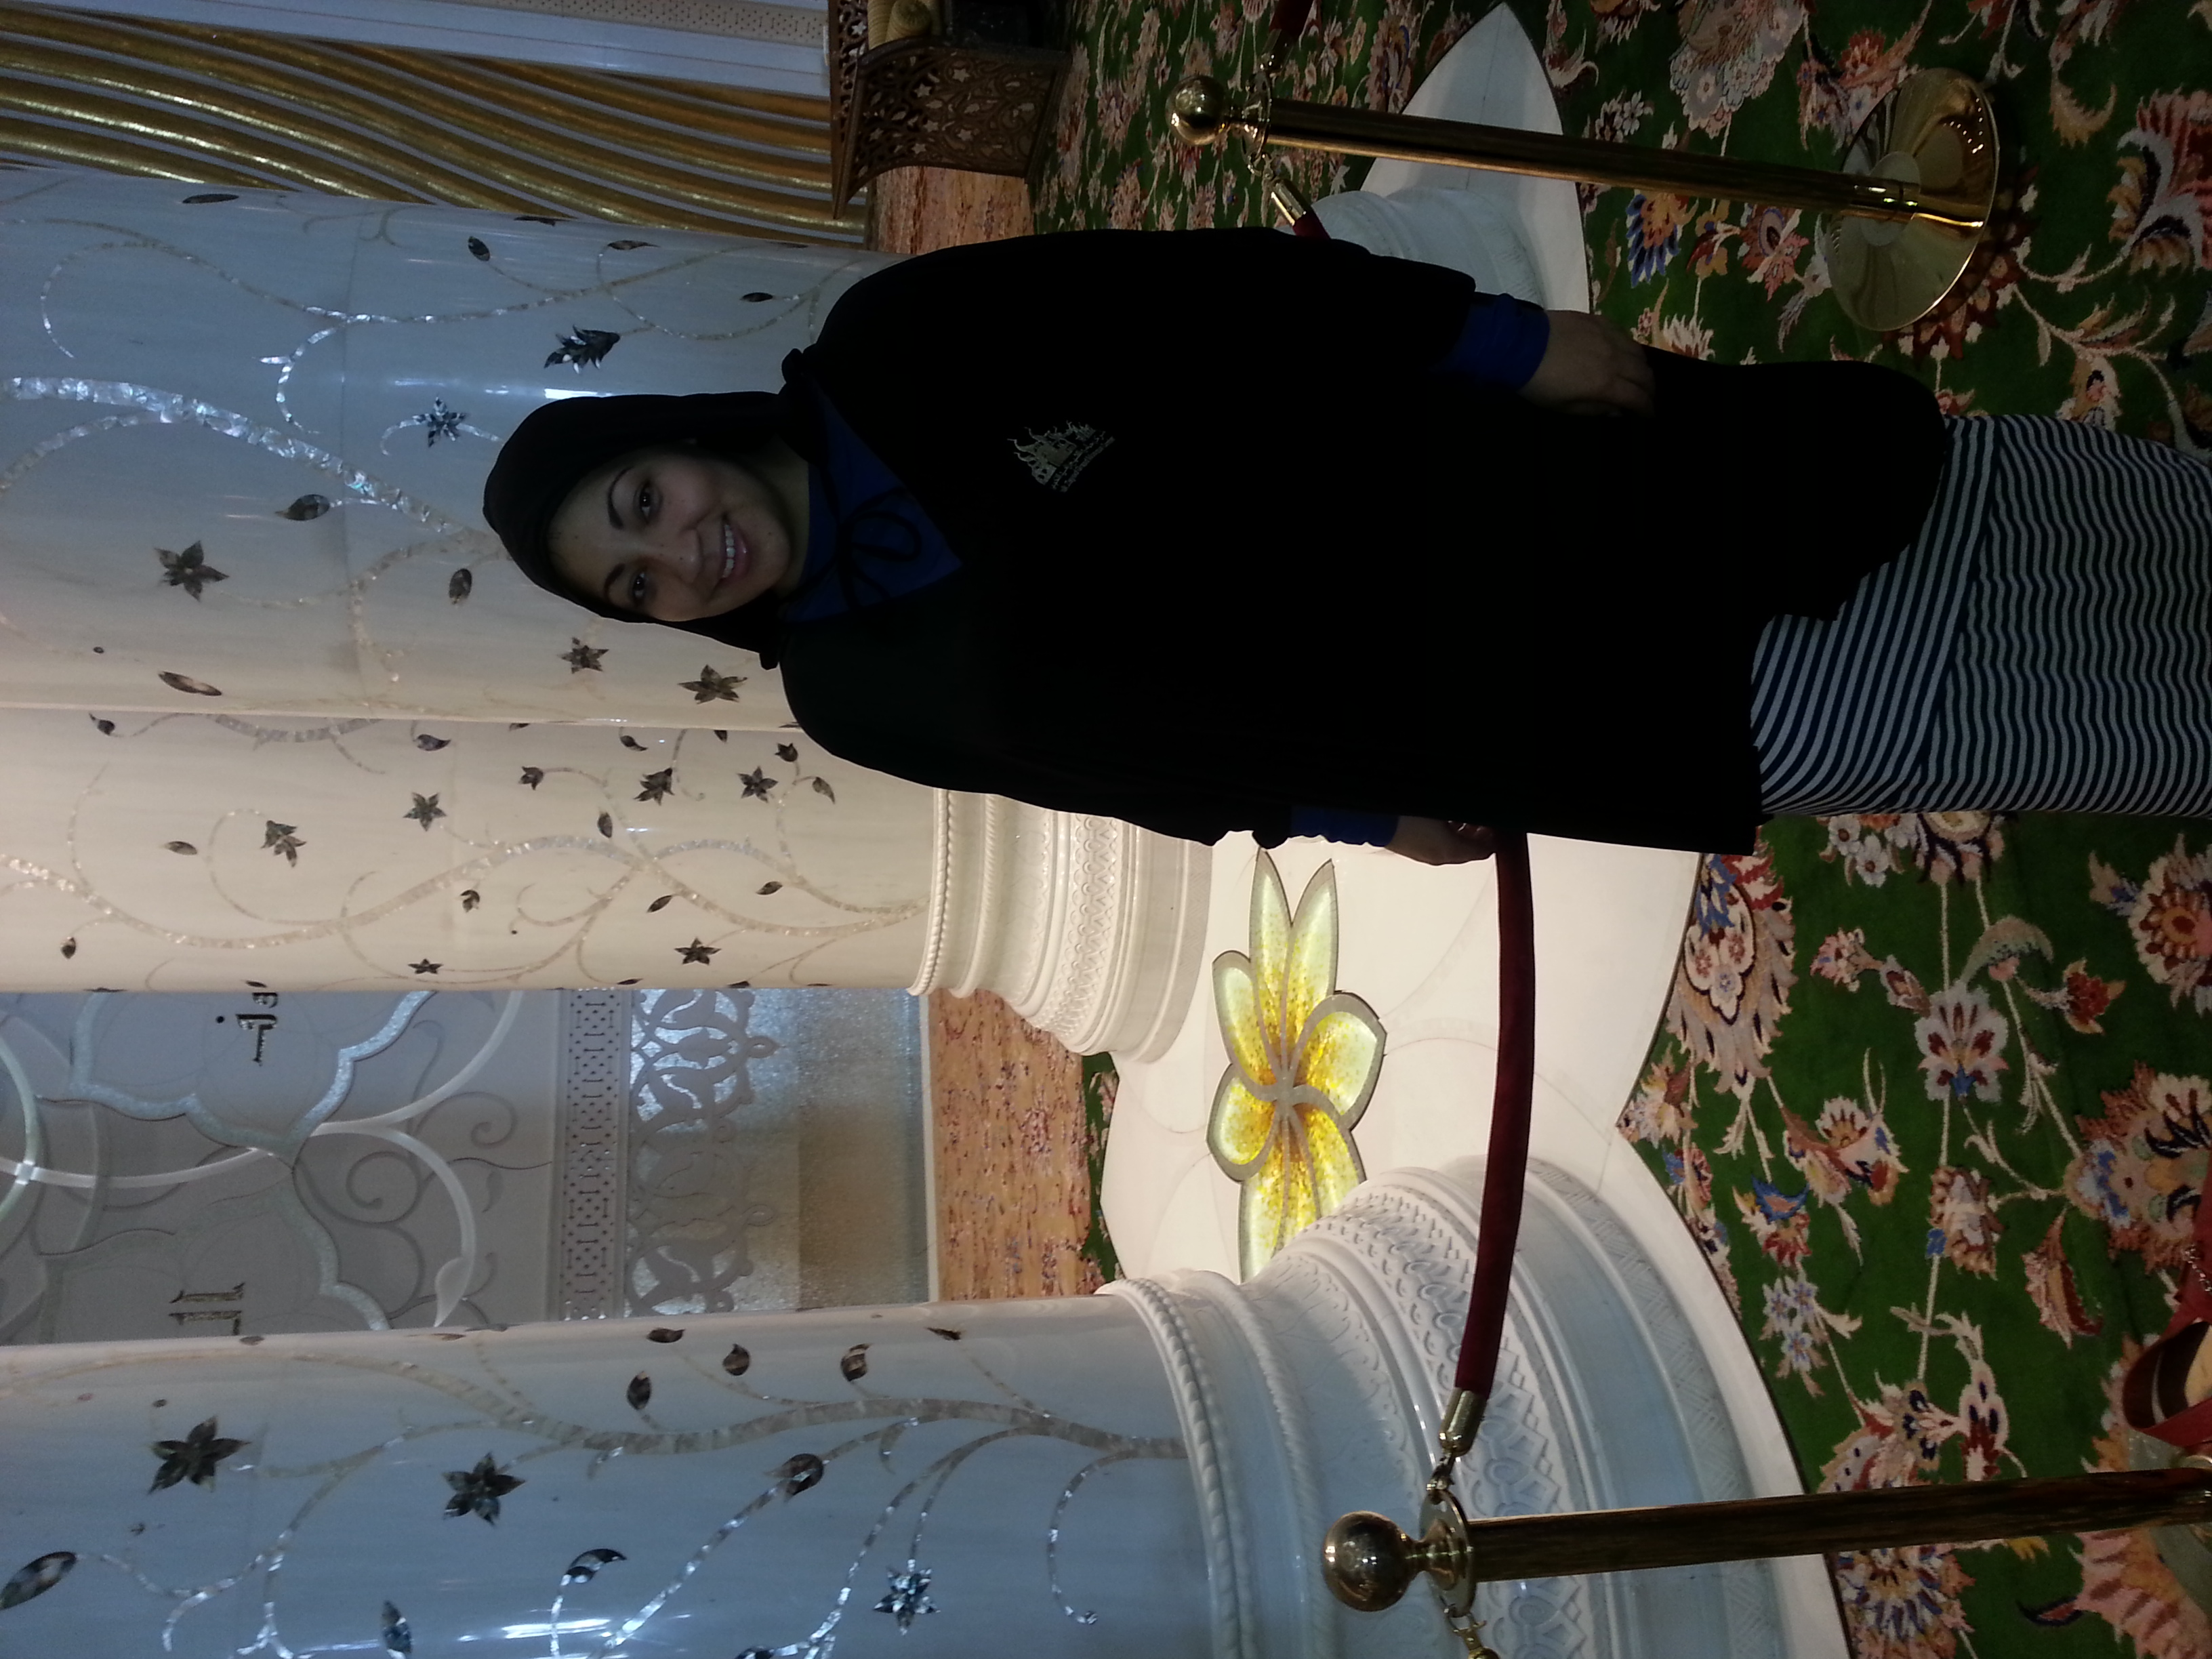 At the Grand Mosque in Abu Dhabi